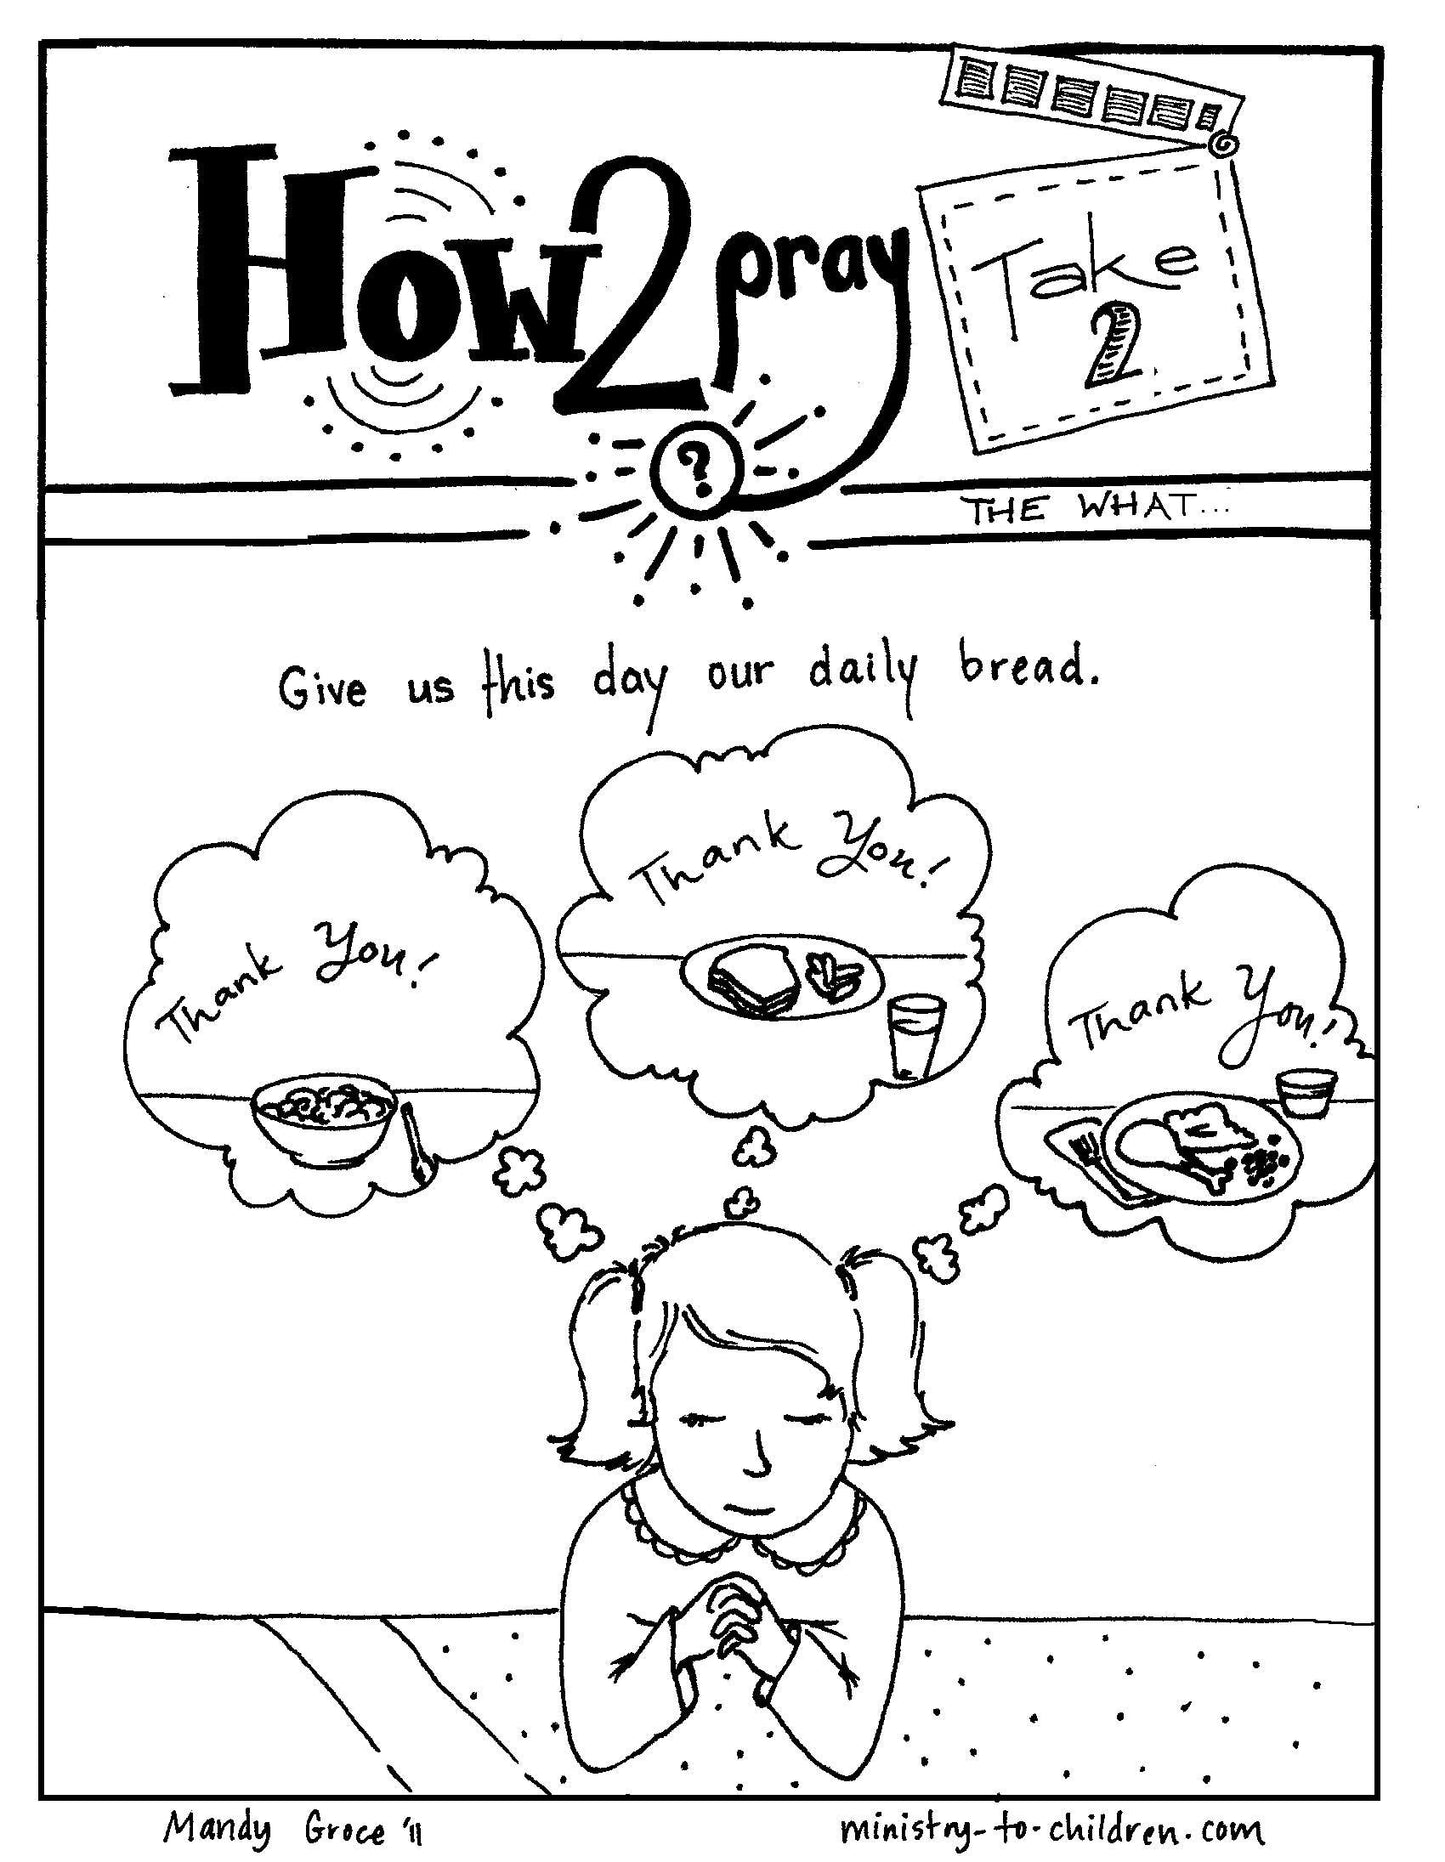 The Lord's Prayer Coloring Book for Kids (FREE) 5 Pages  (download only) - Sunday School Store 